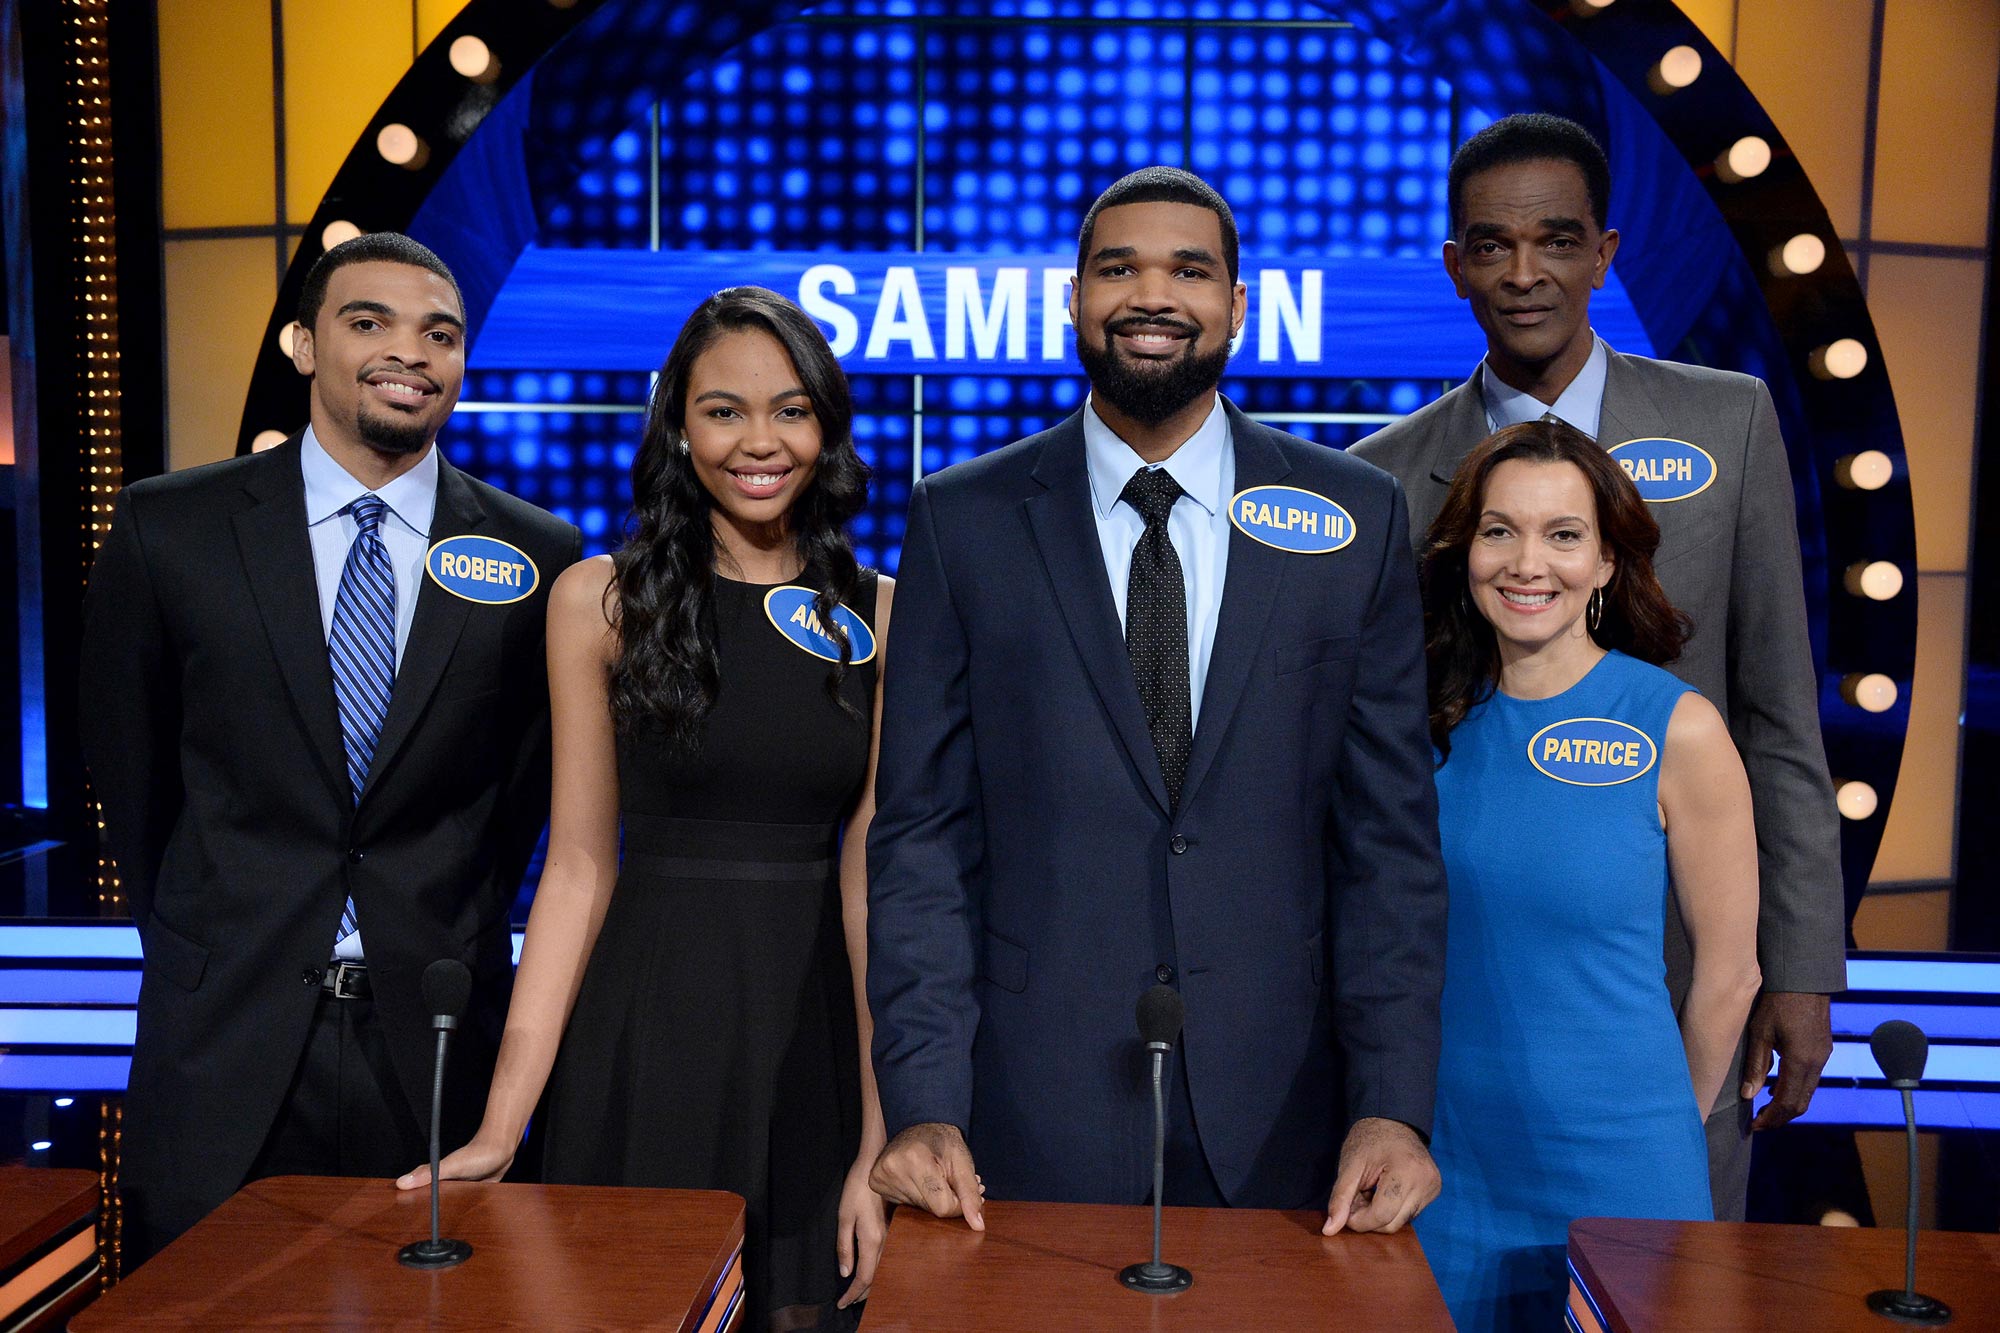 left to right, Robert Alan Sampson, Anna Aleize Sampson, Ralph Lee Sampson III, Patrice Ablack and Ralph Sampson stand for a group photo on Family Feud